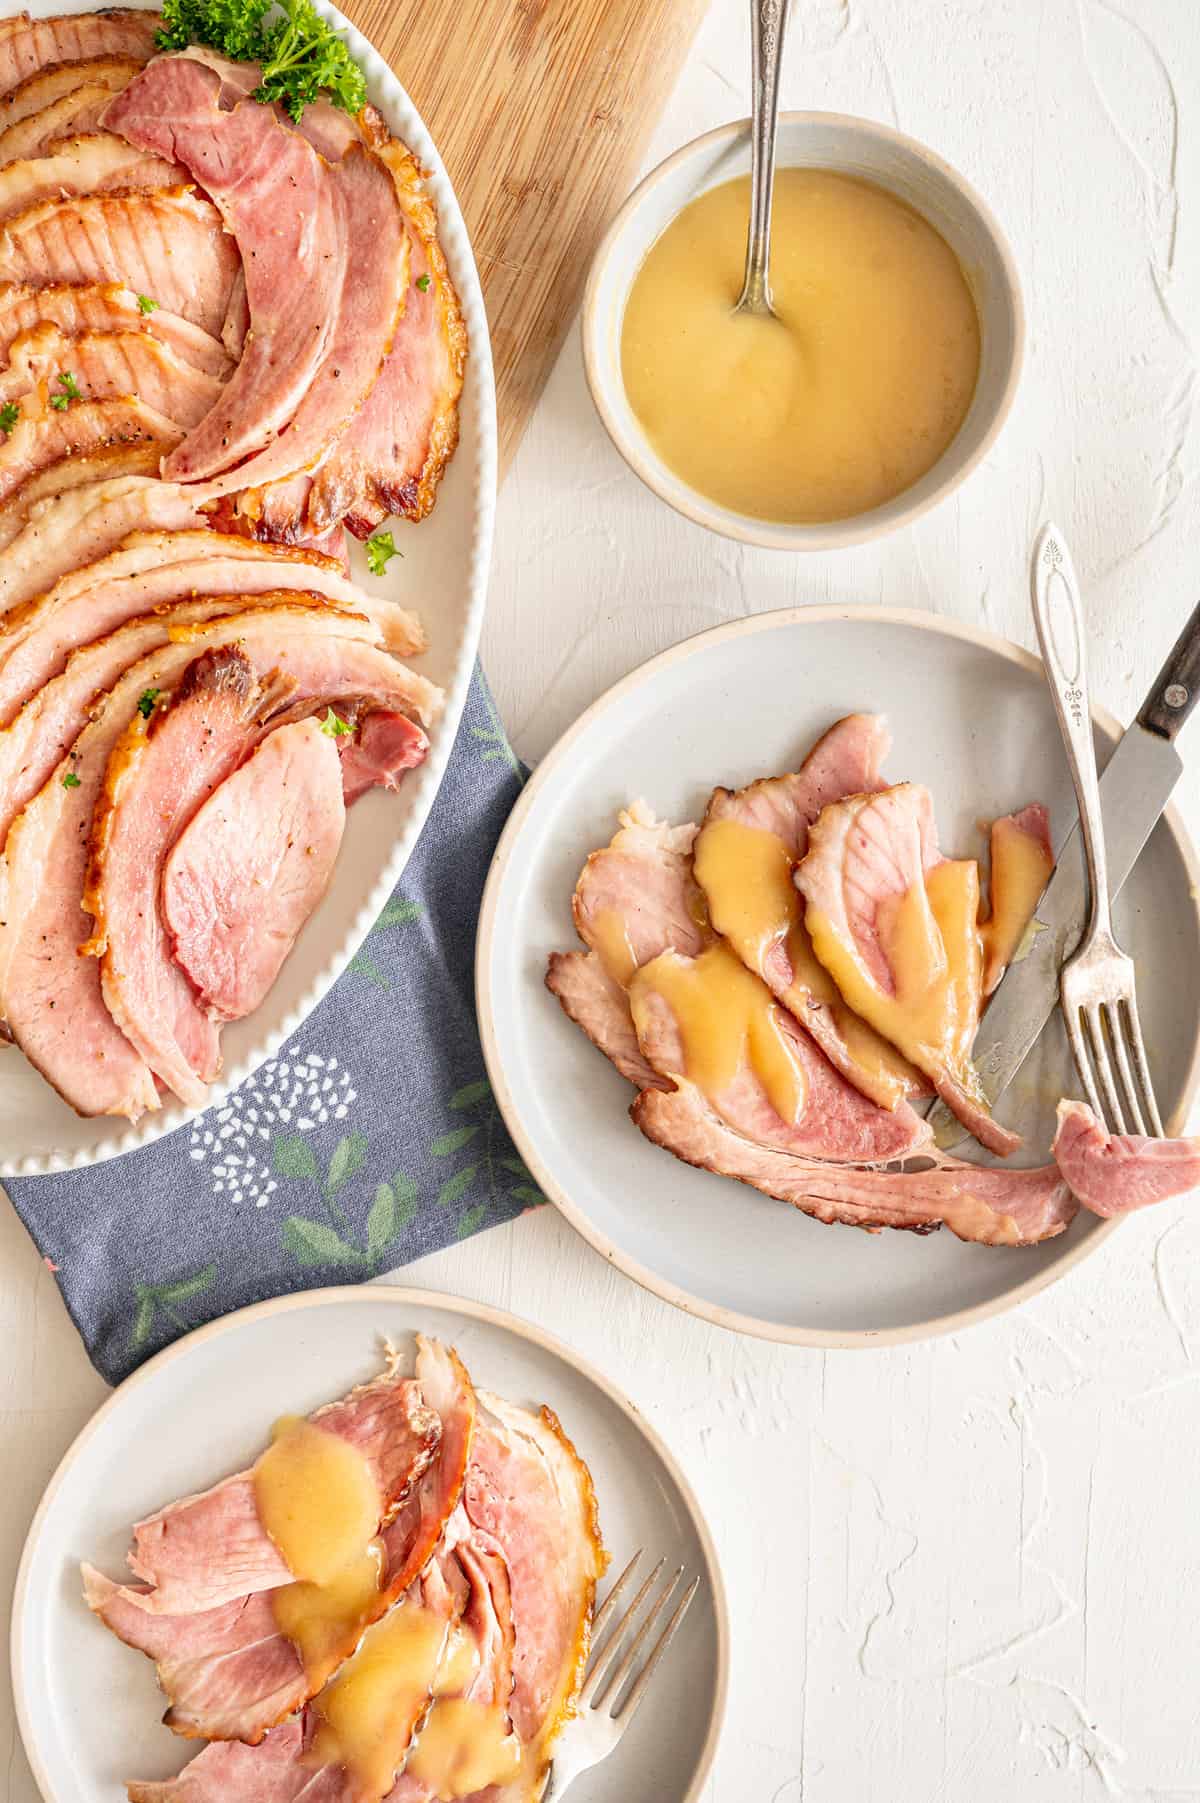 Spiral sliced ham with pineapple sauce drizzled over it on a plate.